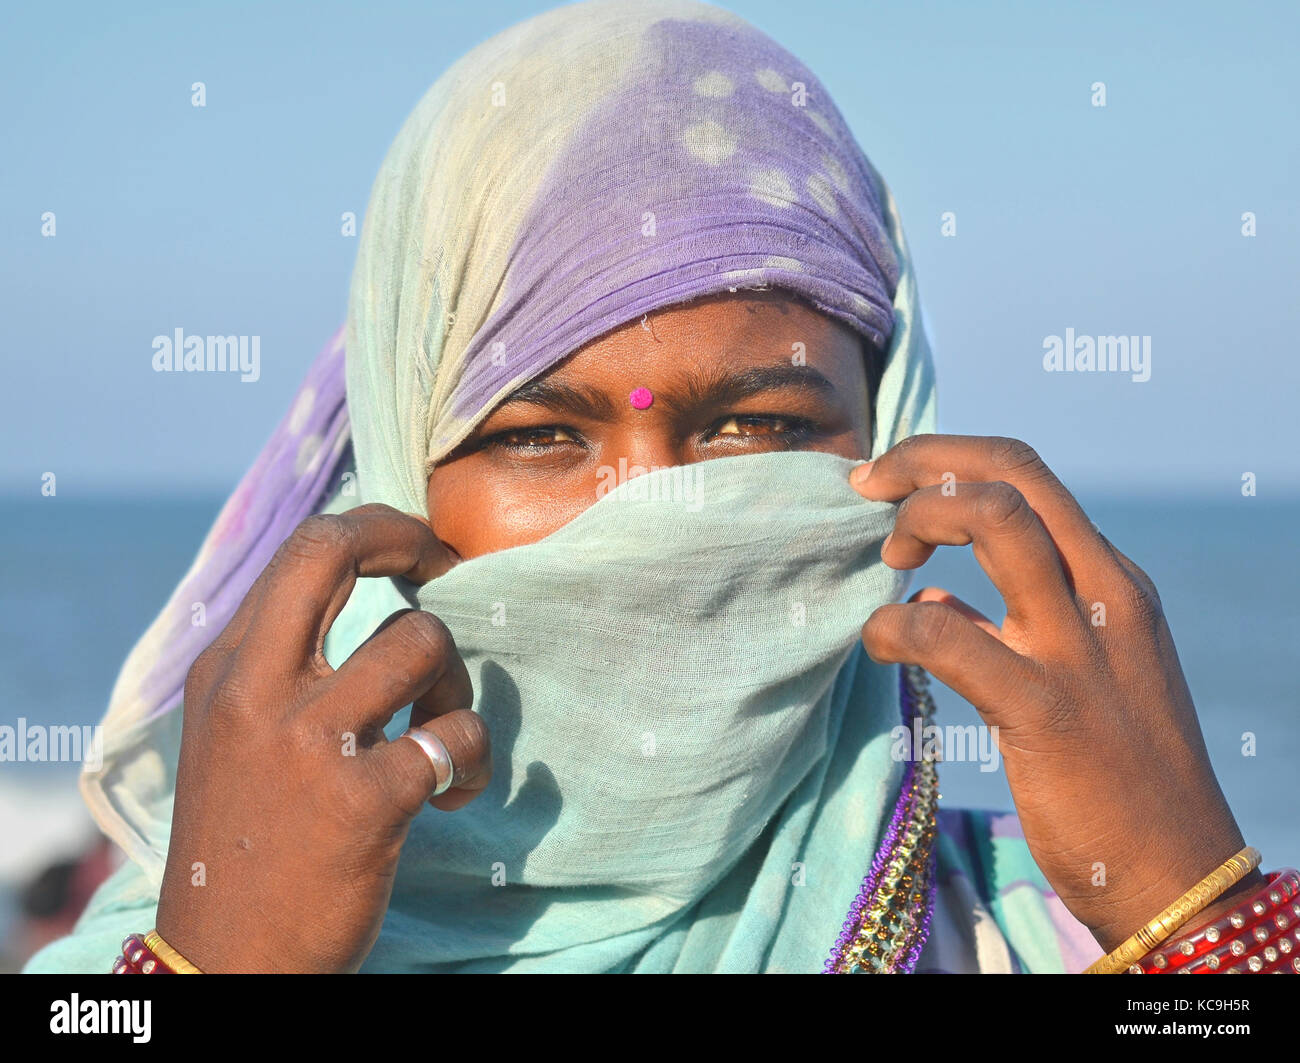 Young Indian souvenir saleswoman, covering her nose and mouth with a blue dust veil Stock Photo